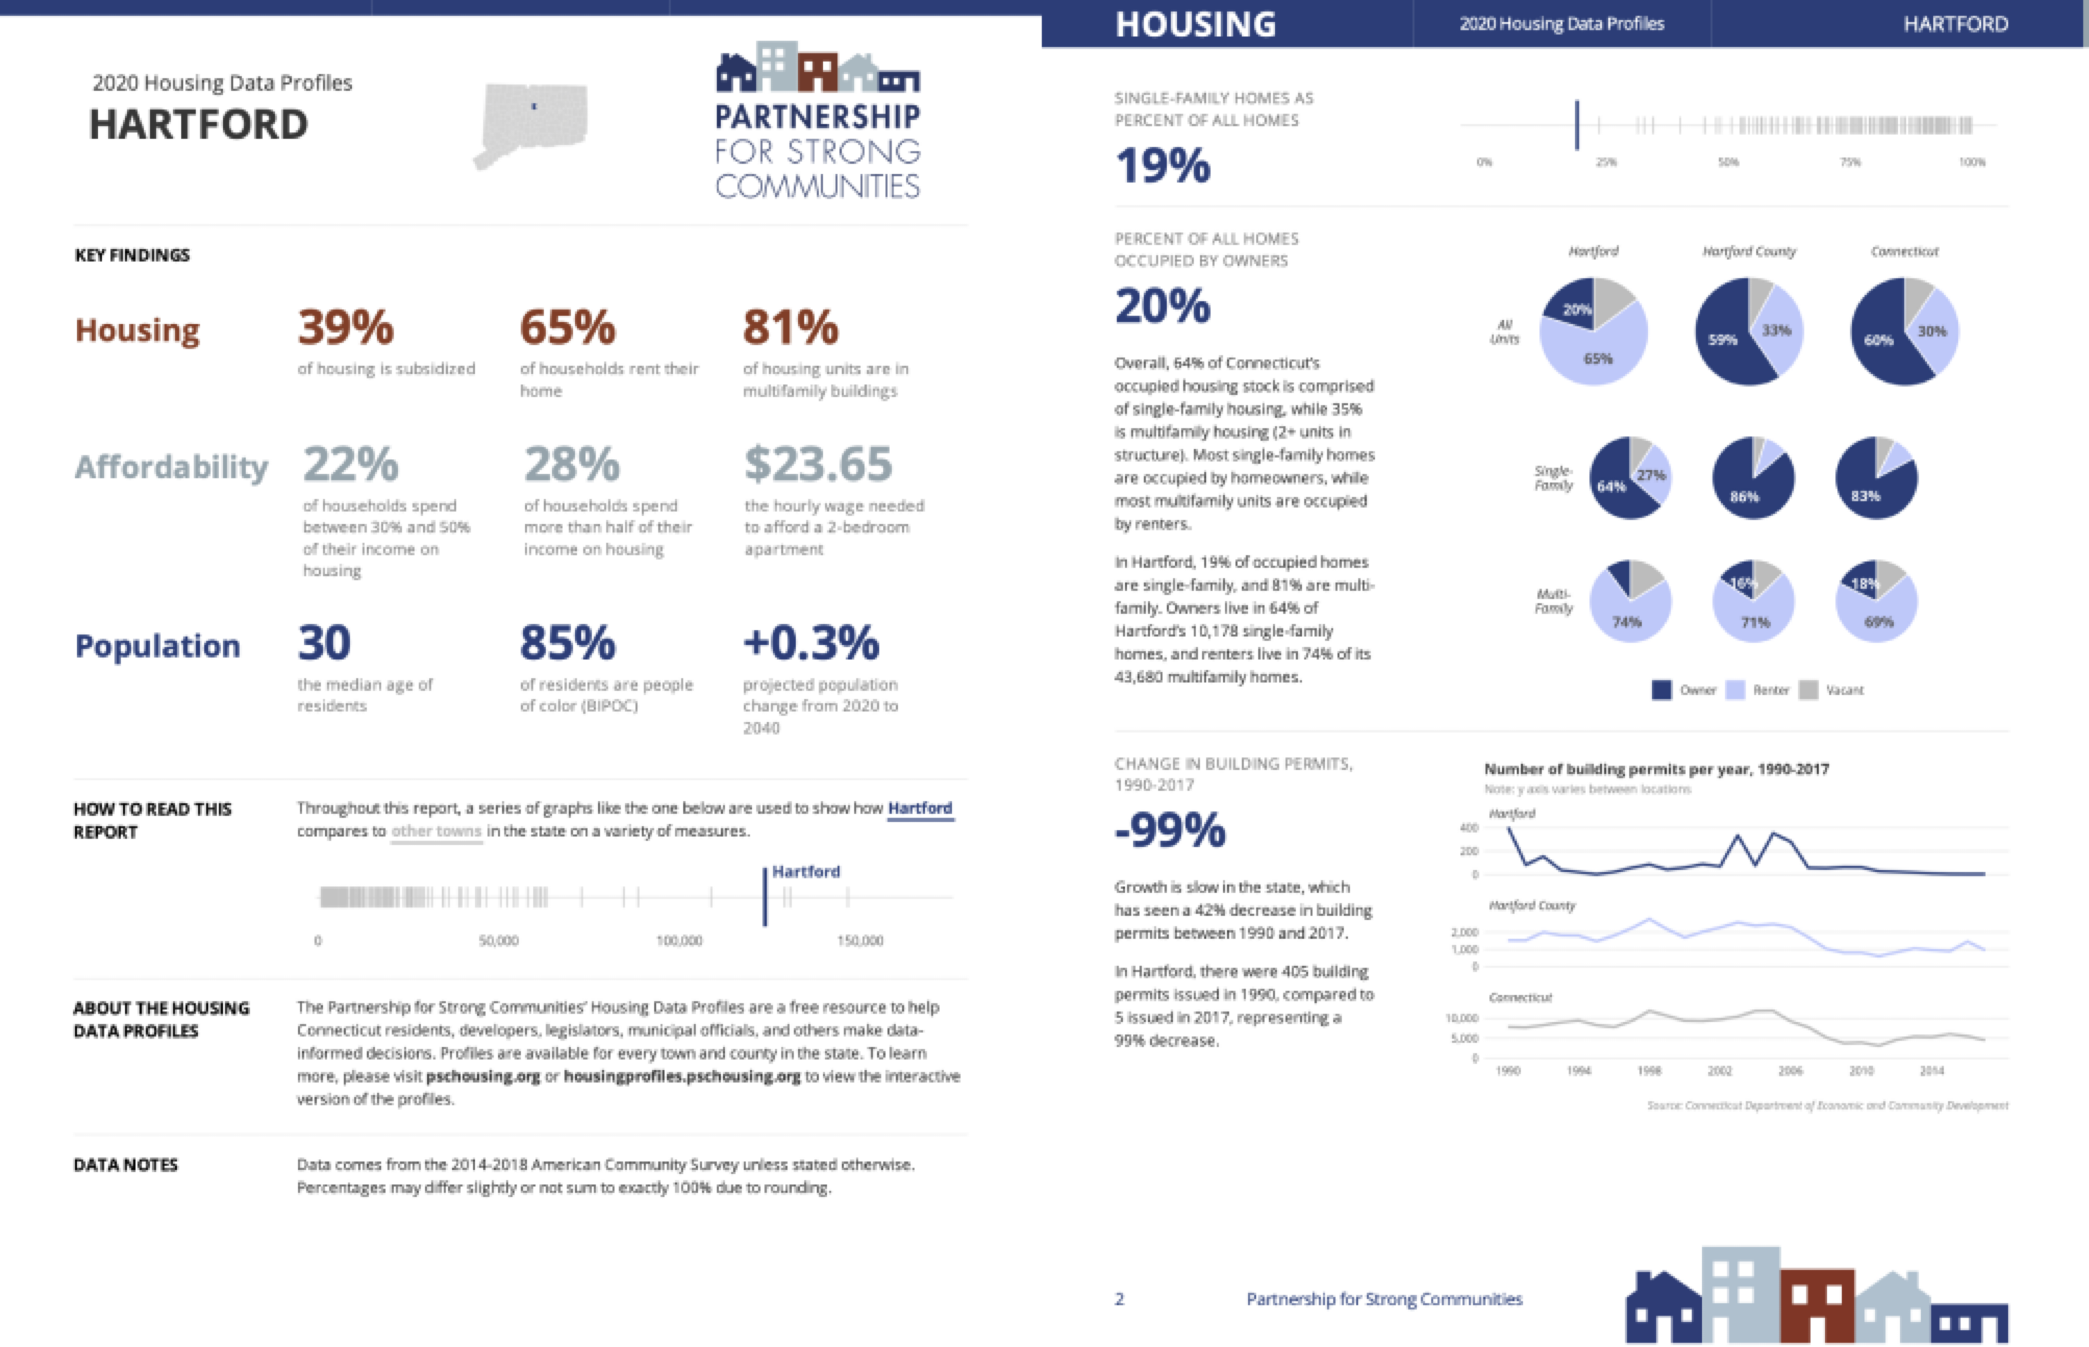 Sample pages from a report on housing in demographics in Hartford, Connecticut